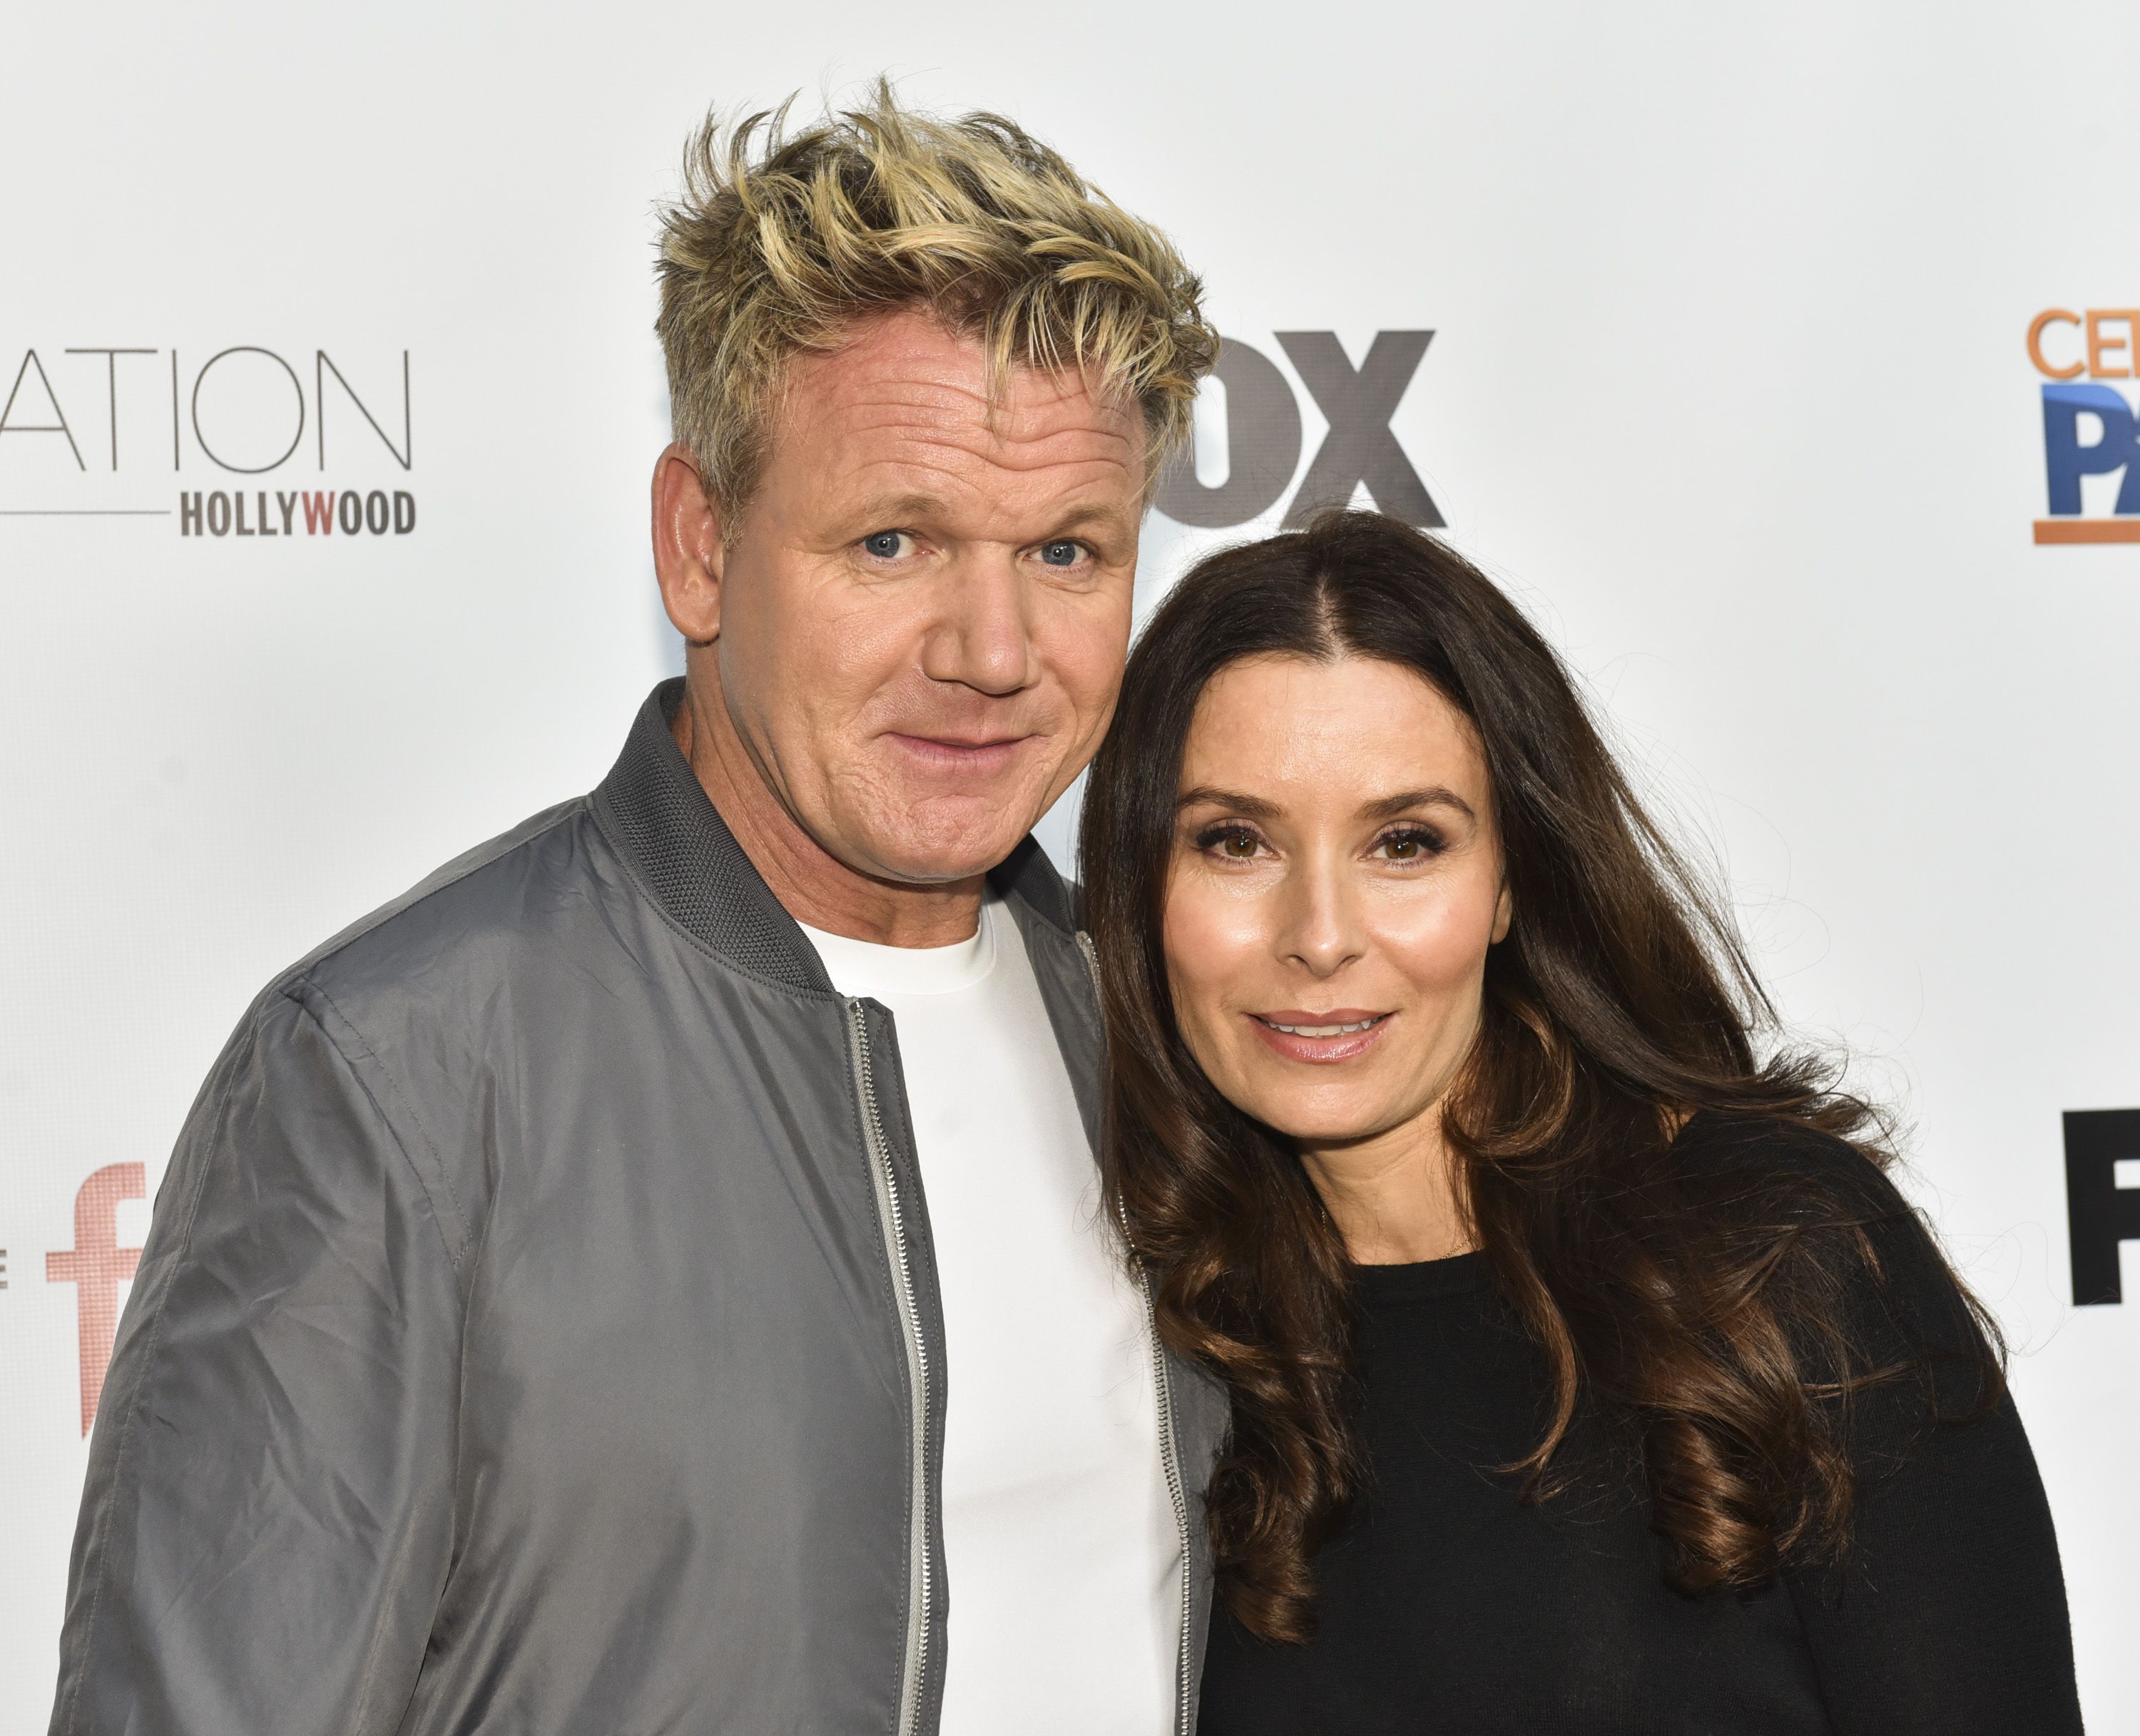 Celebrity chef Gordon Ramsay (L) and Tana Ramsay attend "The F Word" celebration at Station Hollywood at W Hollywood Hotel on May 22, 2017 | Photo: Getty Images